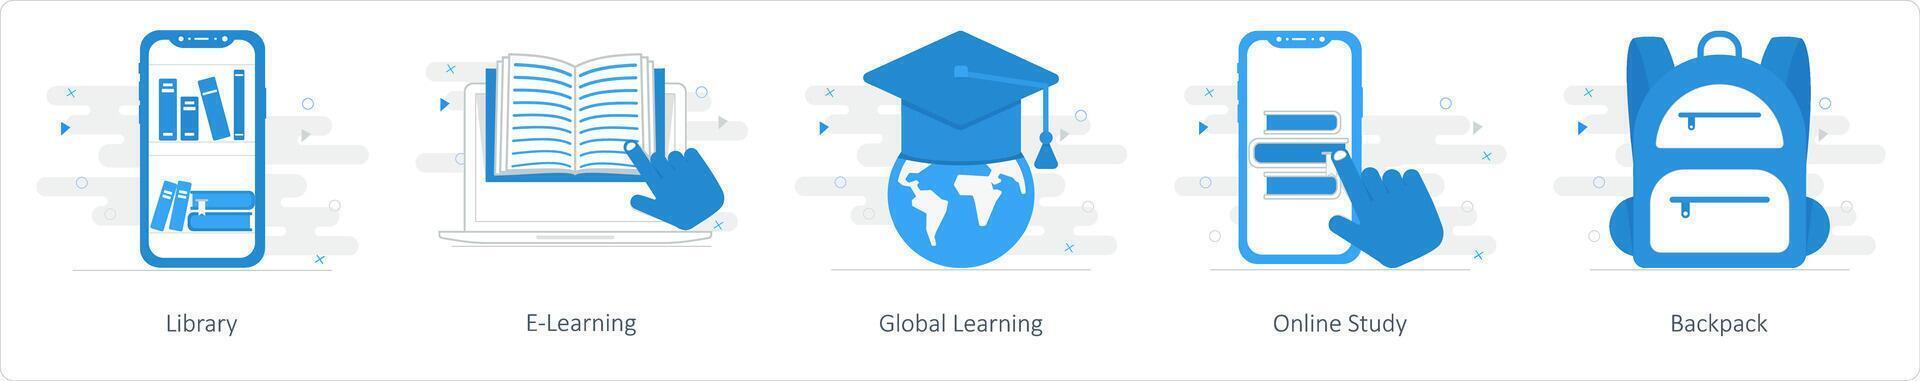 A set of 5 Mix icons as library, e-learning, global learning vector